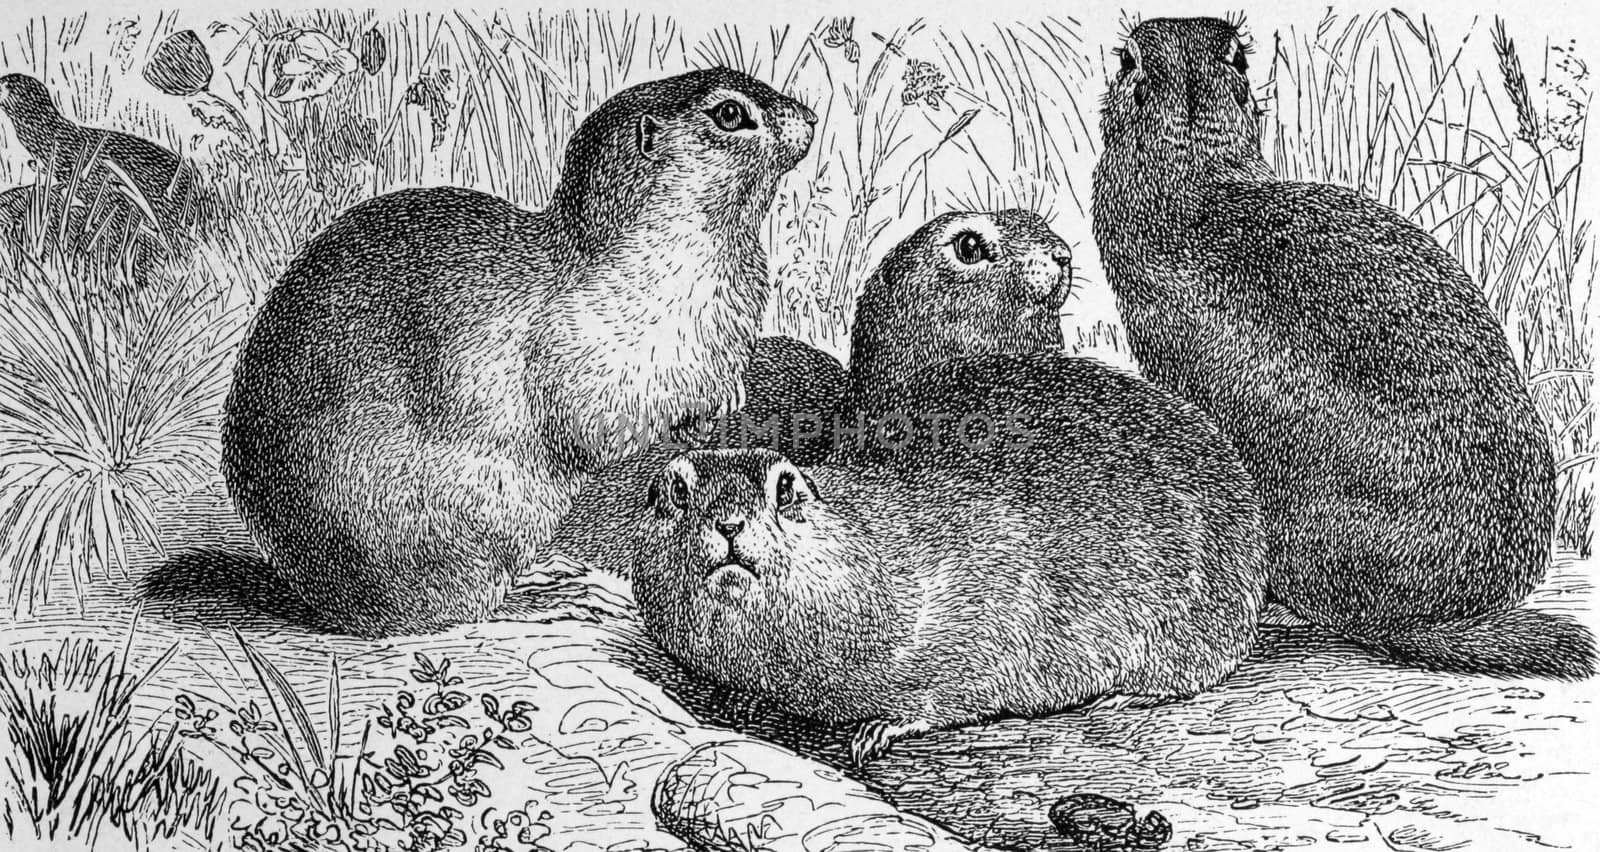 European ground squirrel on engraving from 1890. Engraved by unknown artist and published in Meyers Konversations-Lexikon, Germany,1890.